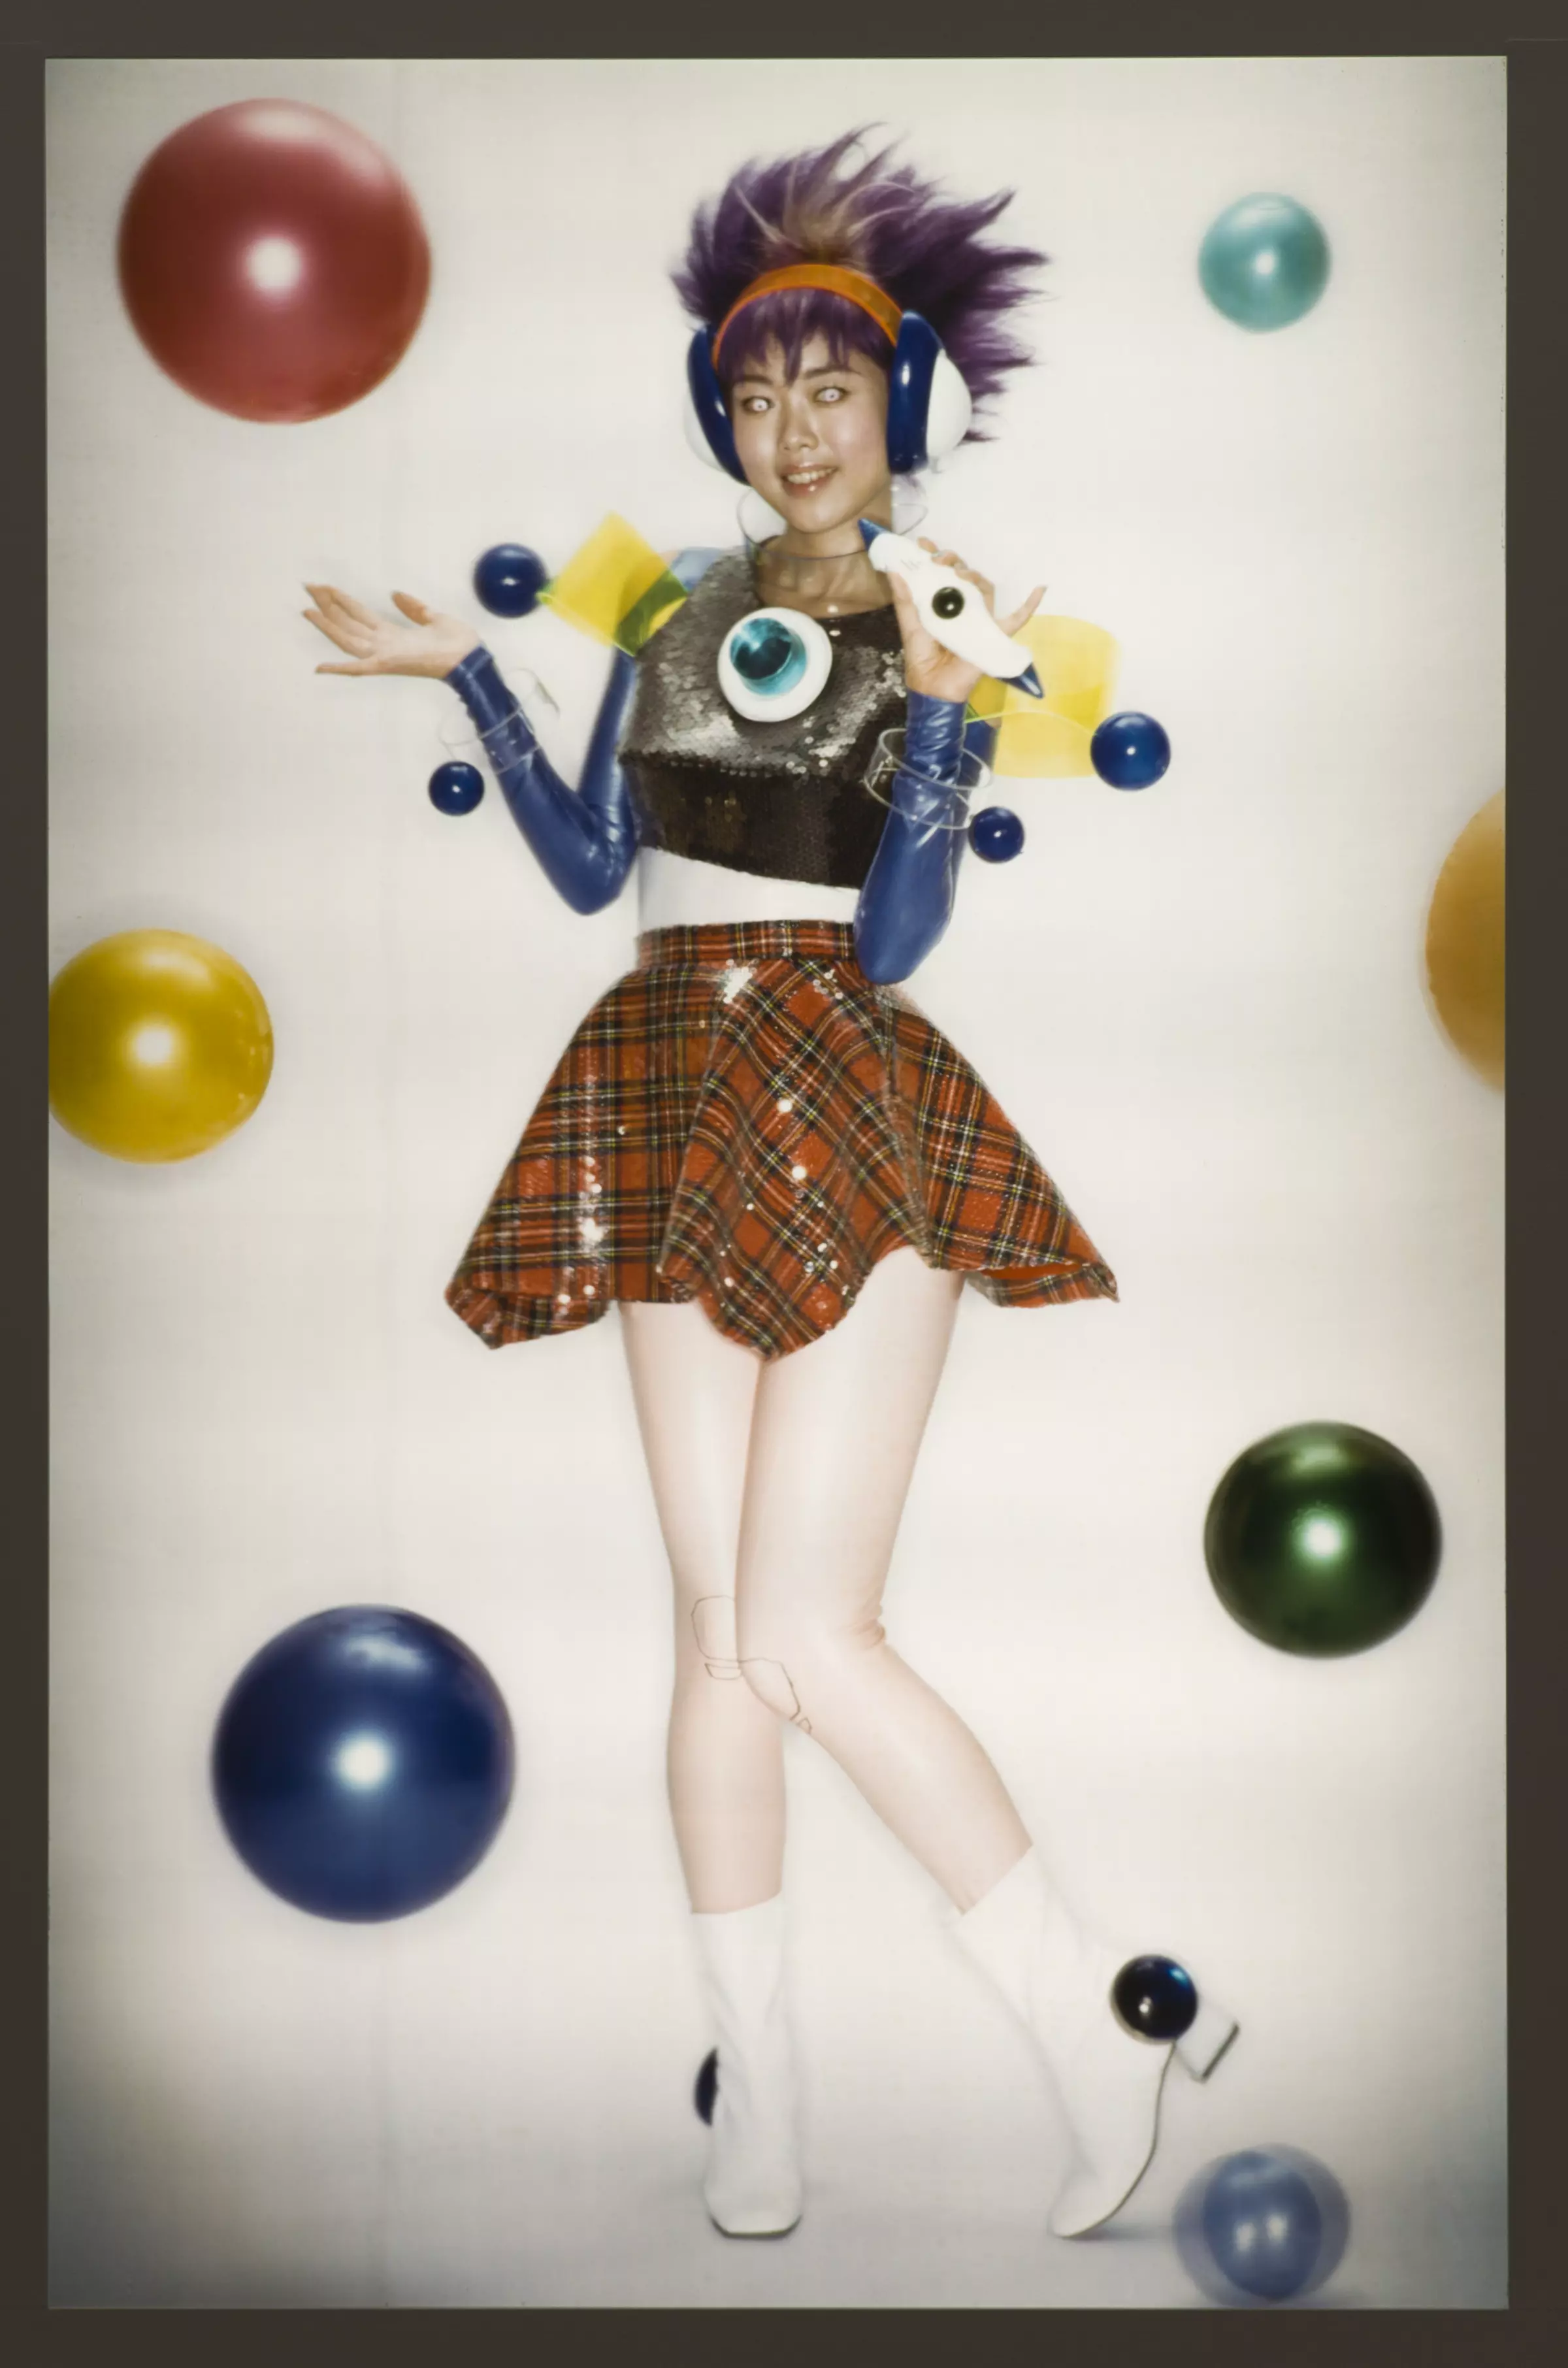 Poppy photograph of a person in a plaid skirt with purple hair and headphones surrounded by different colored circular objects